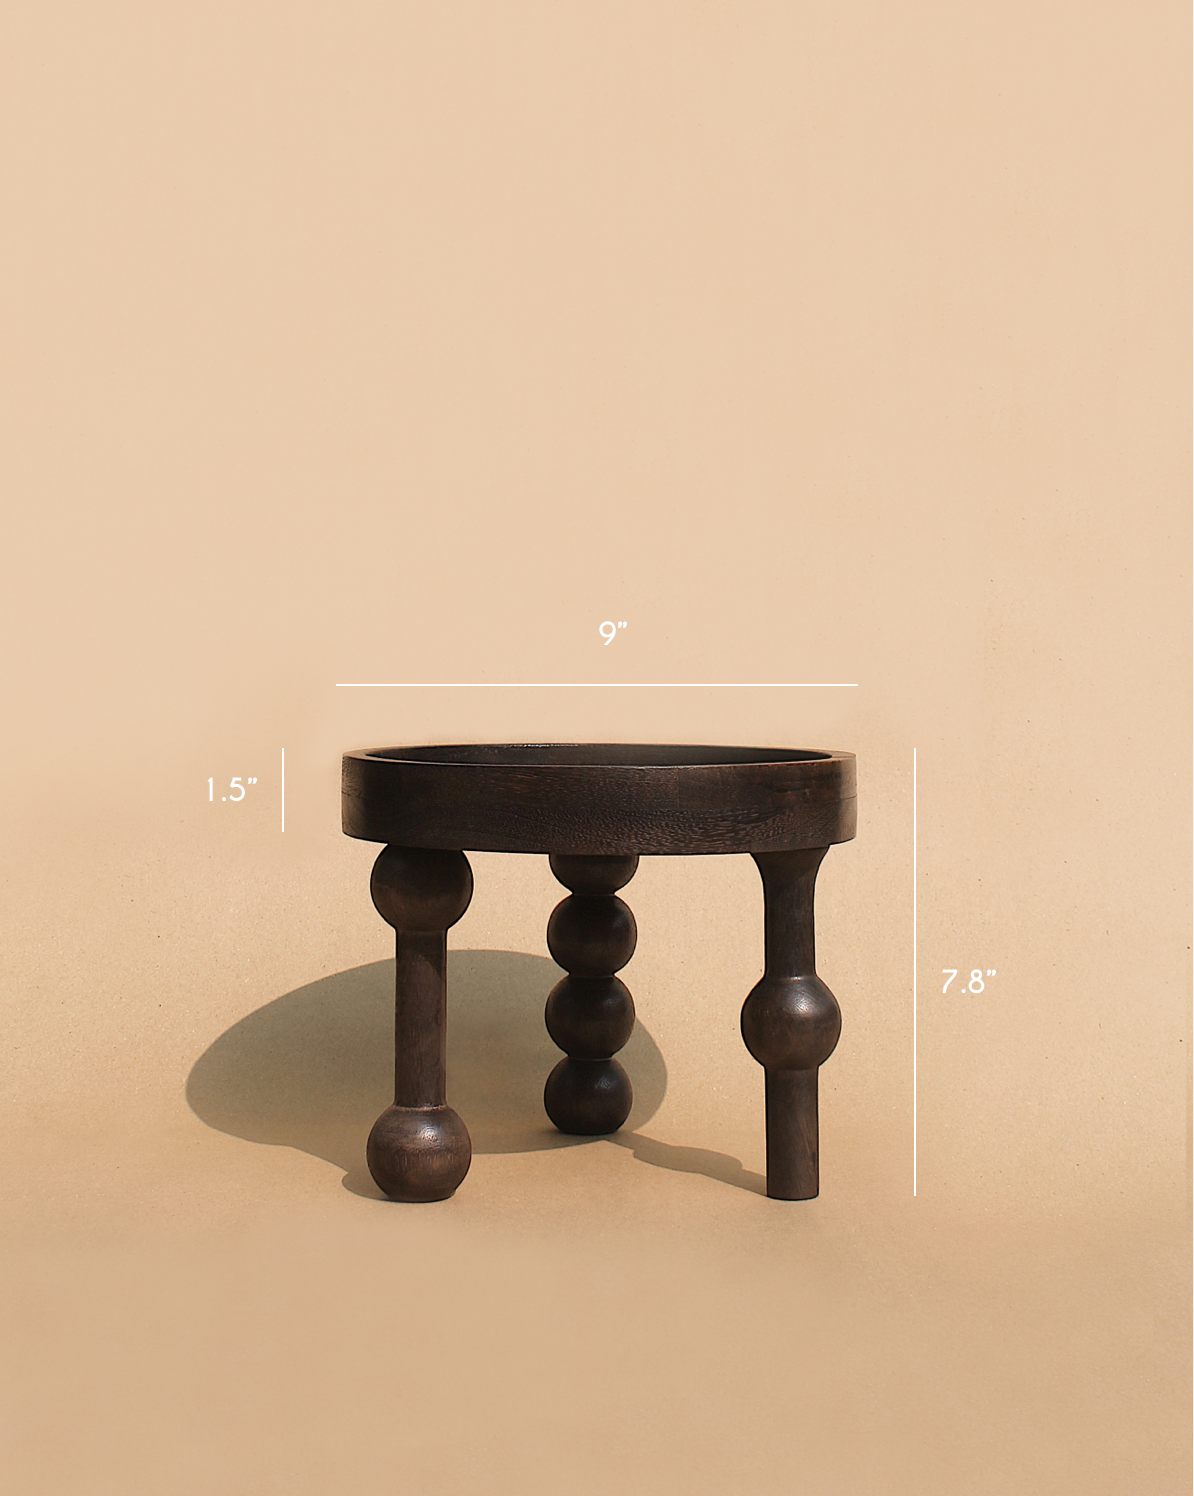 dimension of wooden stool